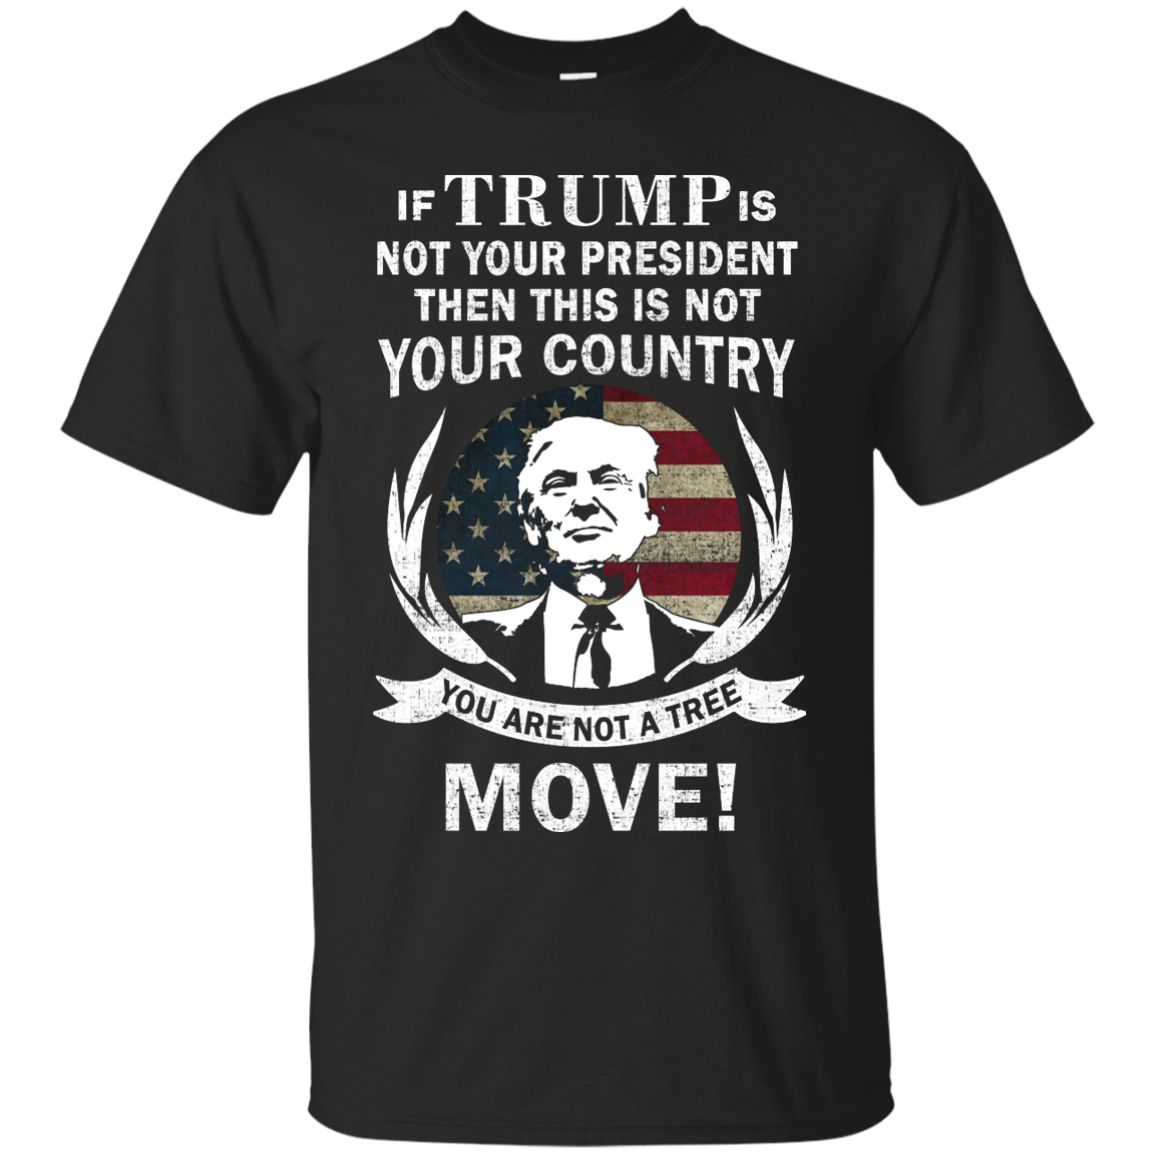 If Trump is Not Your President Then This is Not Your Country Shirt, Hoodie, Tank